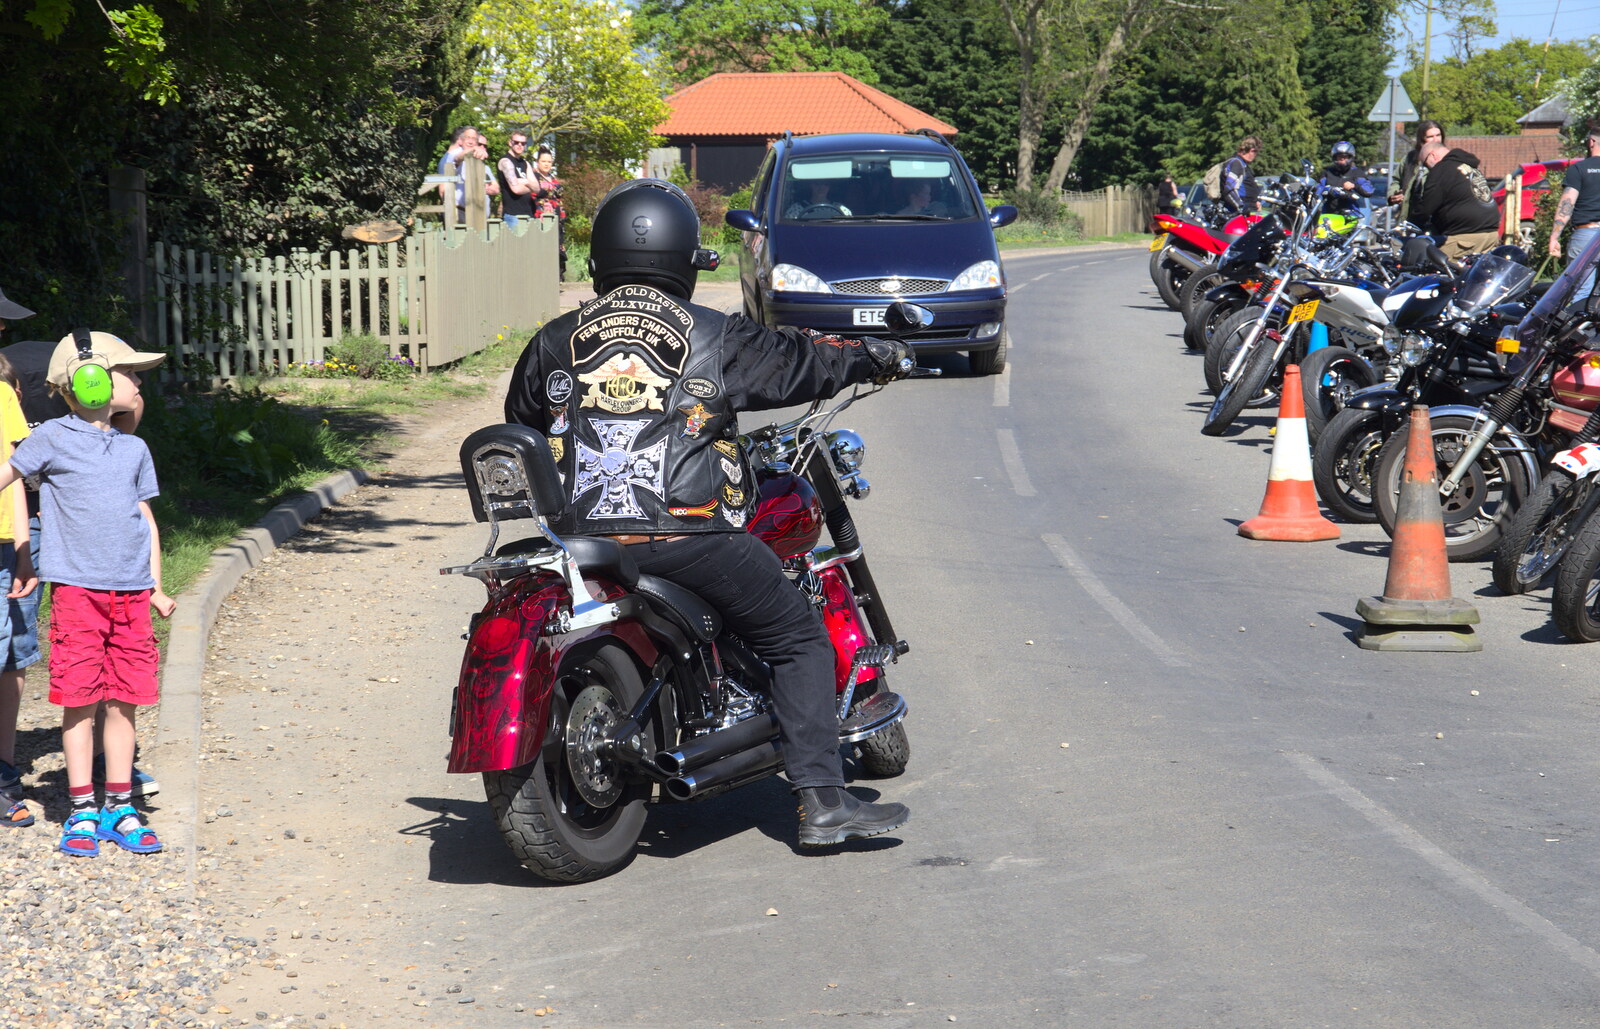 A biker from the Fenlander's Chapter from Beer, Bikes and Bands, Burston Crown, Burston, Norfolk - 6th May 2018